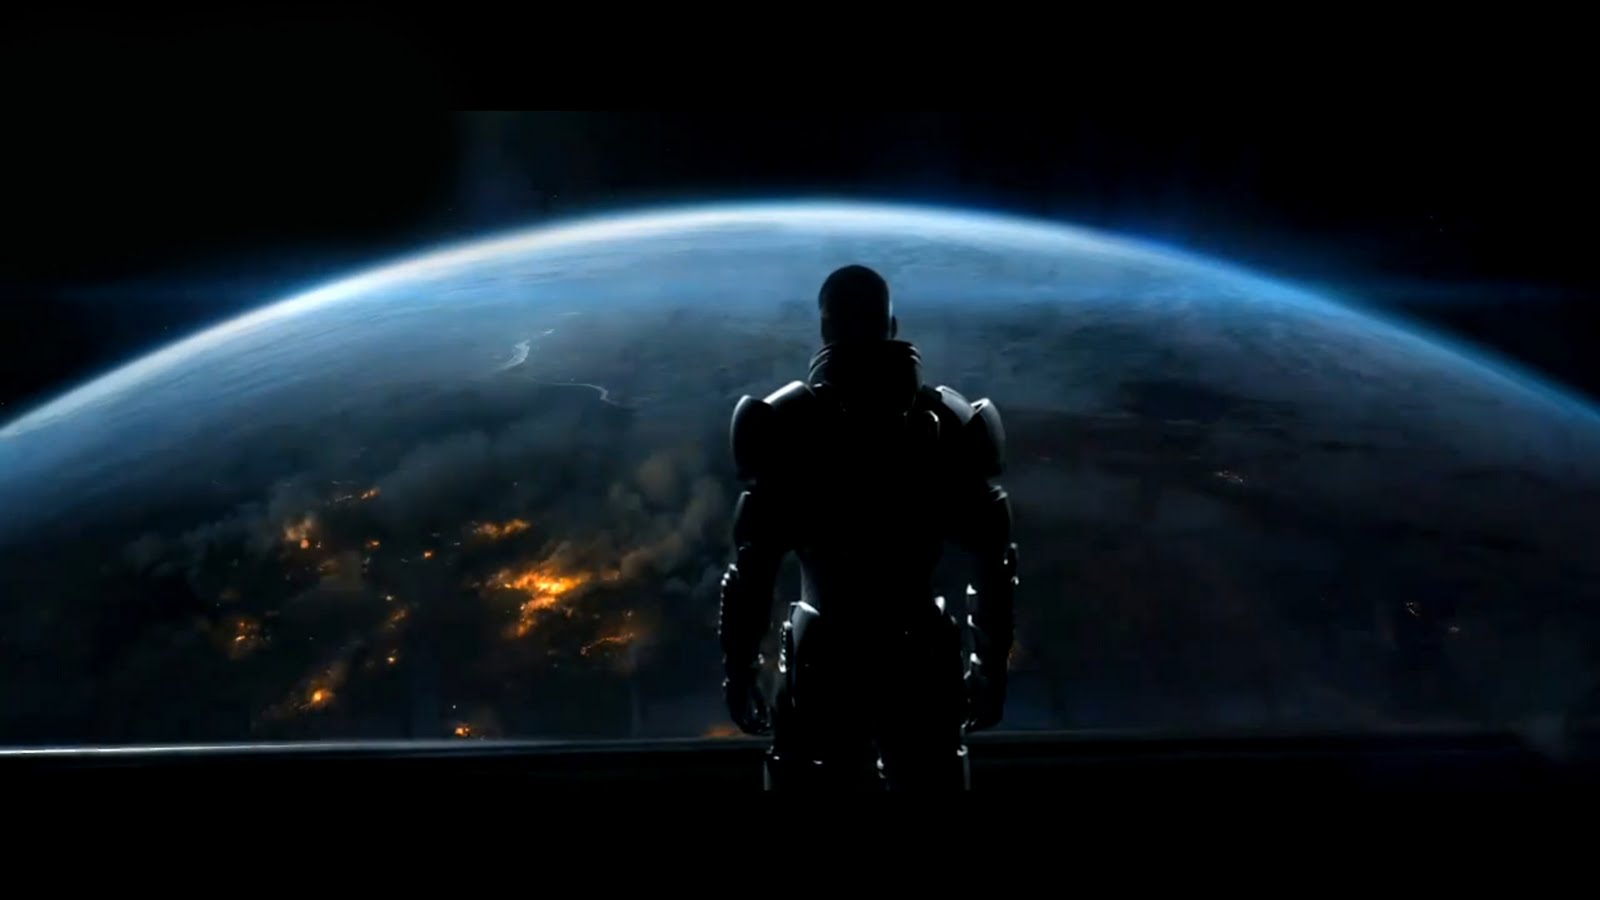 Mass Effect HD Wallpaper In For Your